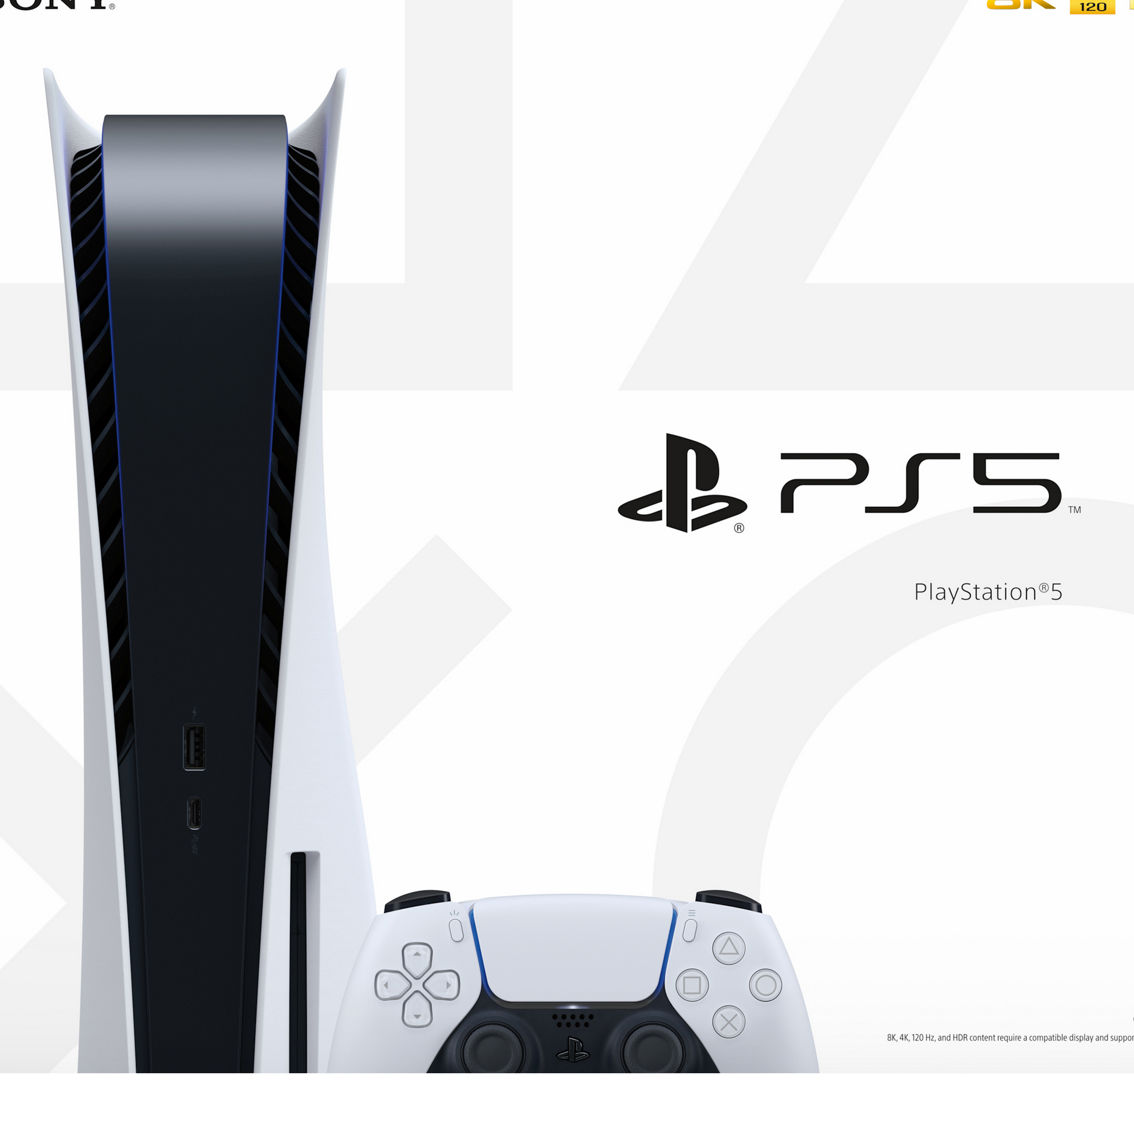 Sony PS5 Standard Disk Console V3 - Image 2 of 3